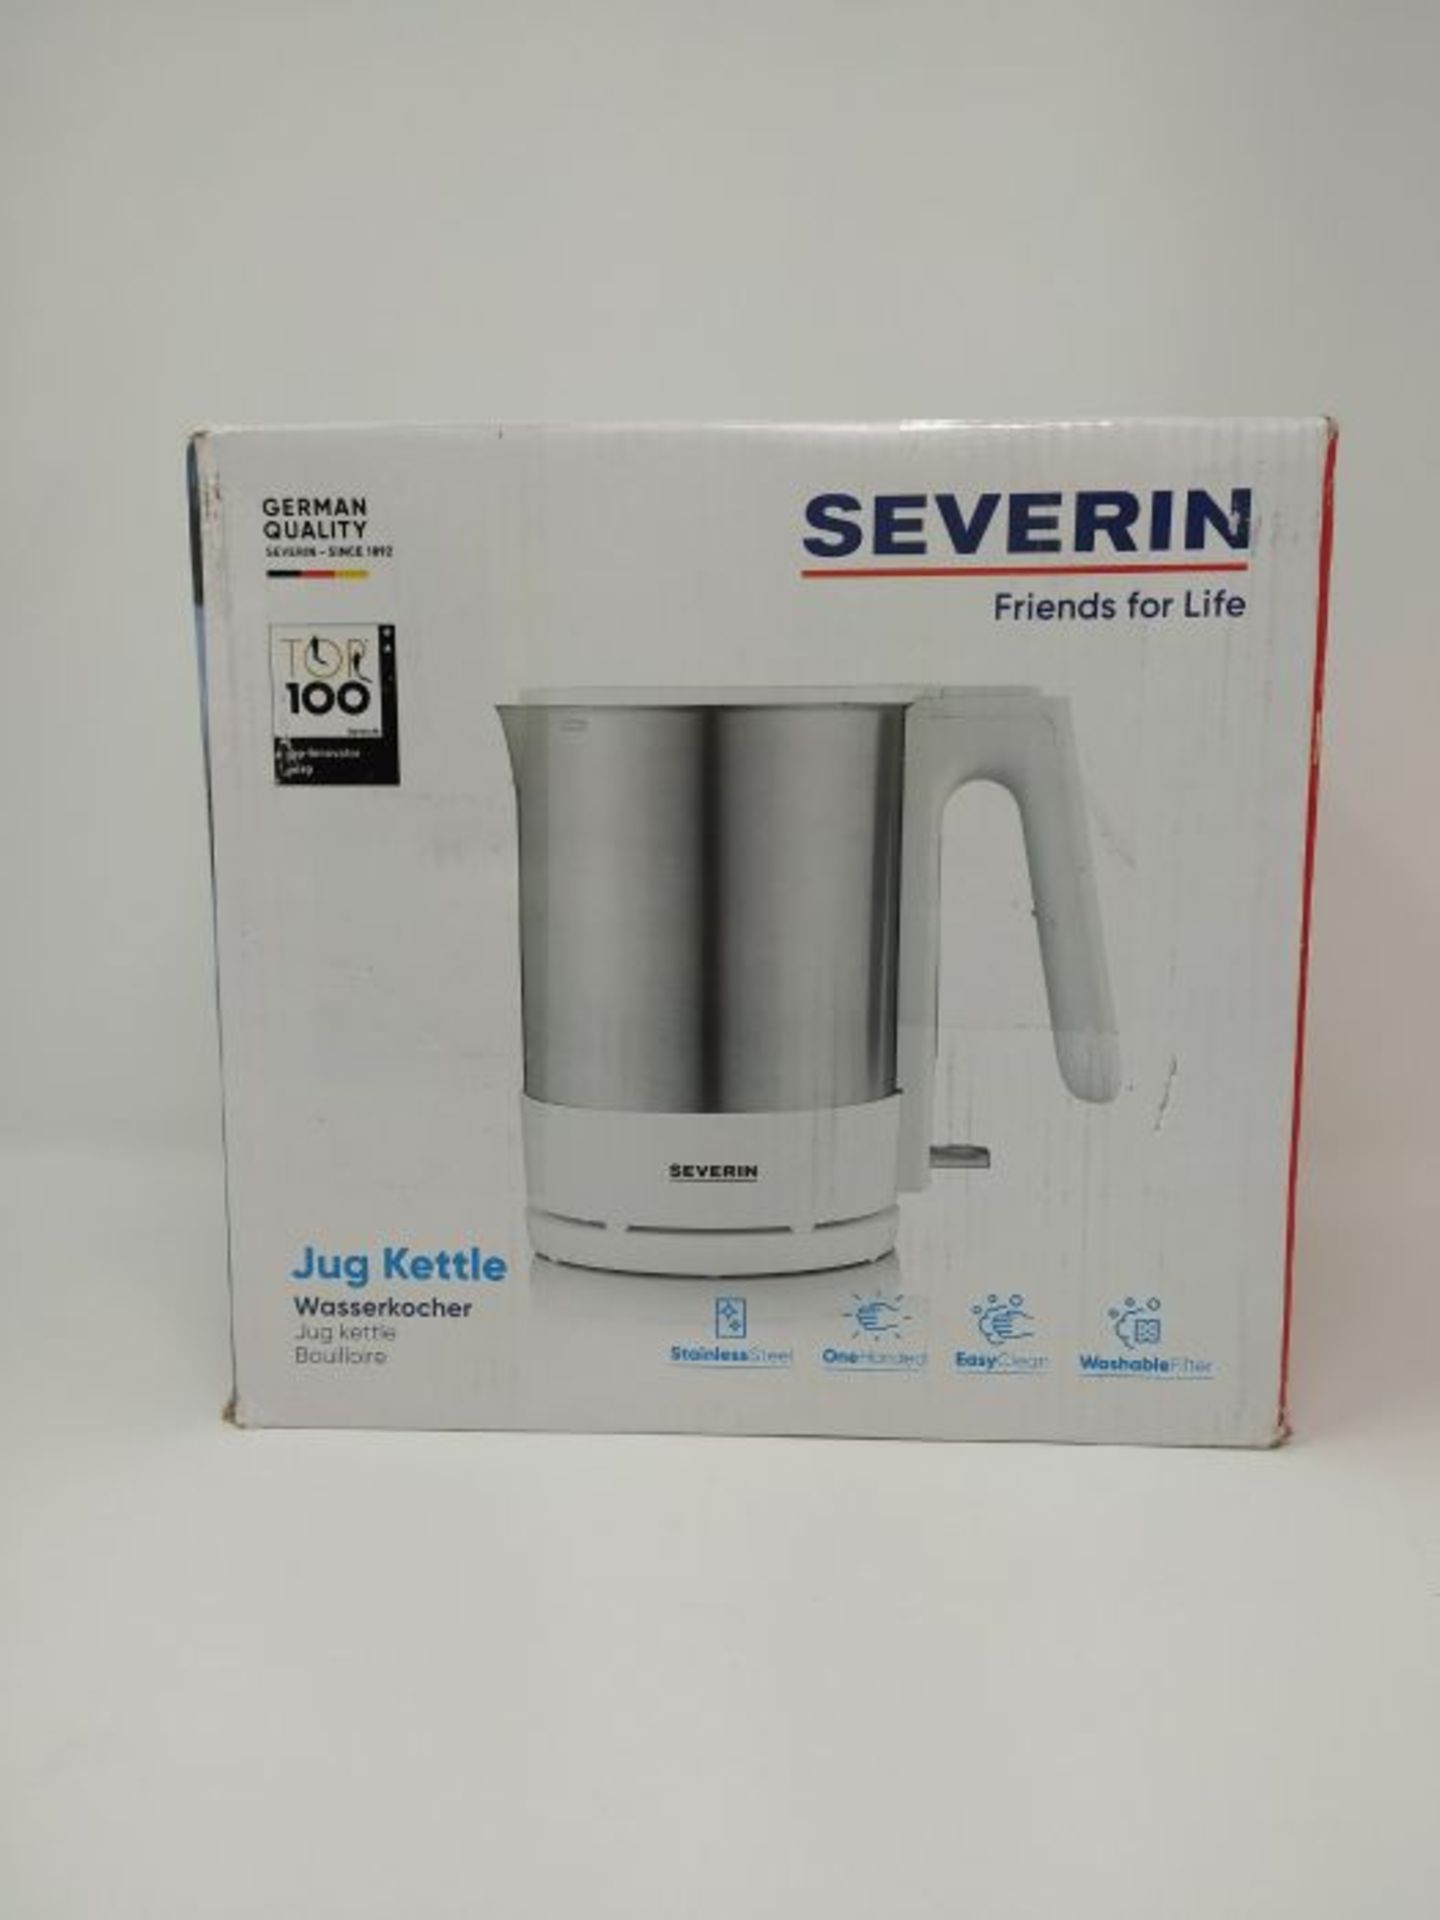 Severin WK 3419 electric kettle 1.7 L Stainless steel,White 2200 W WK 3419, 1.7 L, 220 - Image 2 of 3